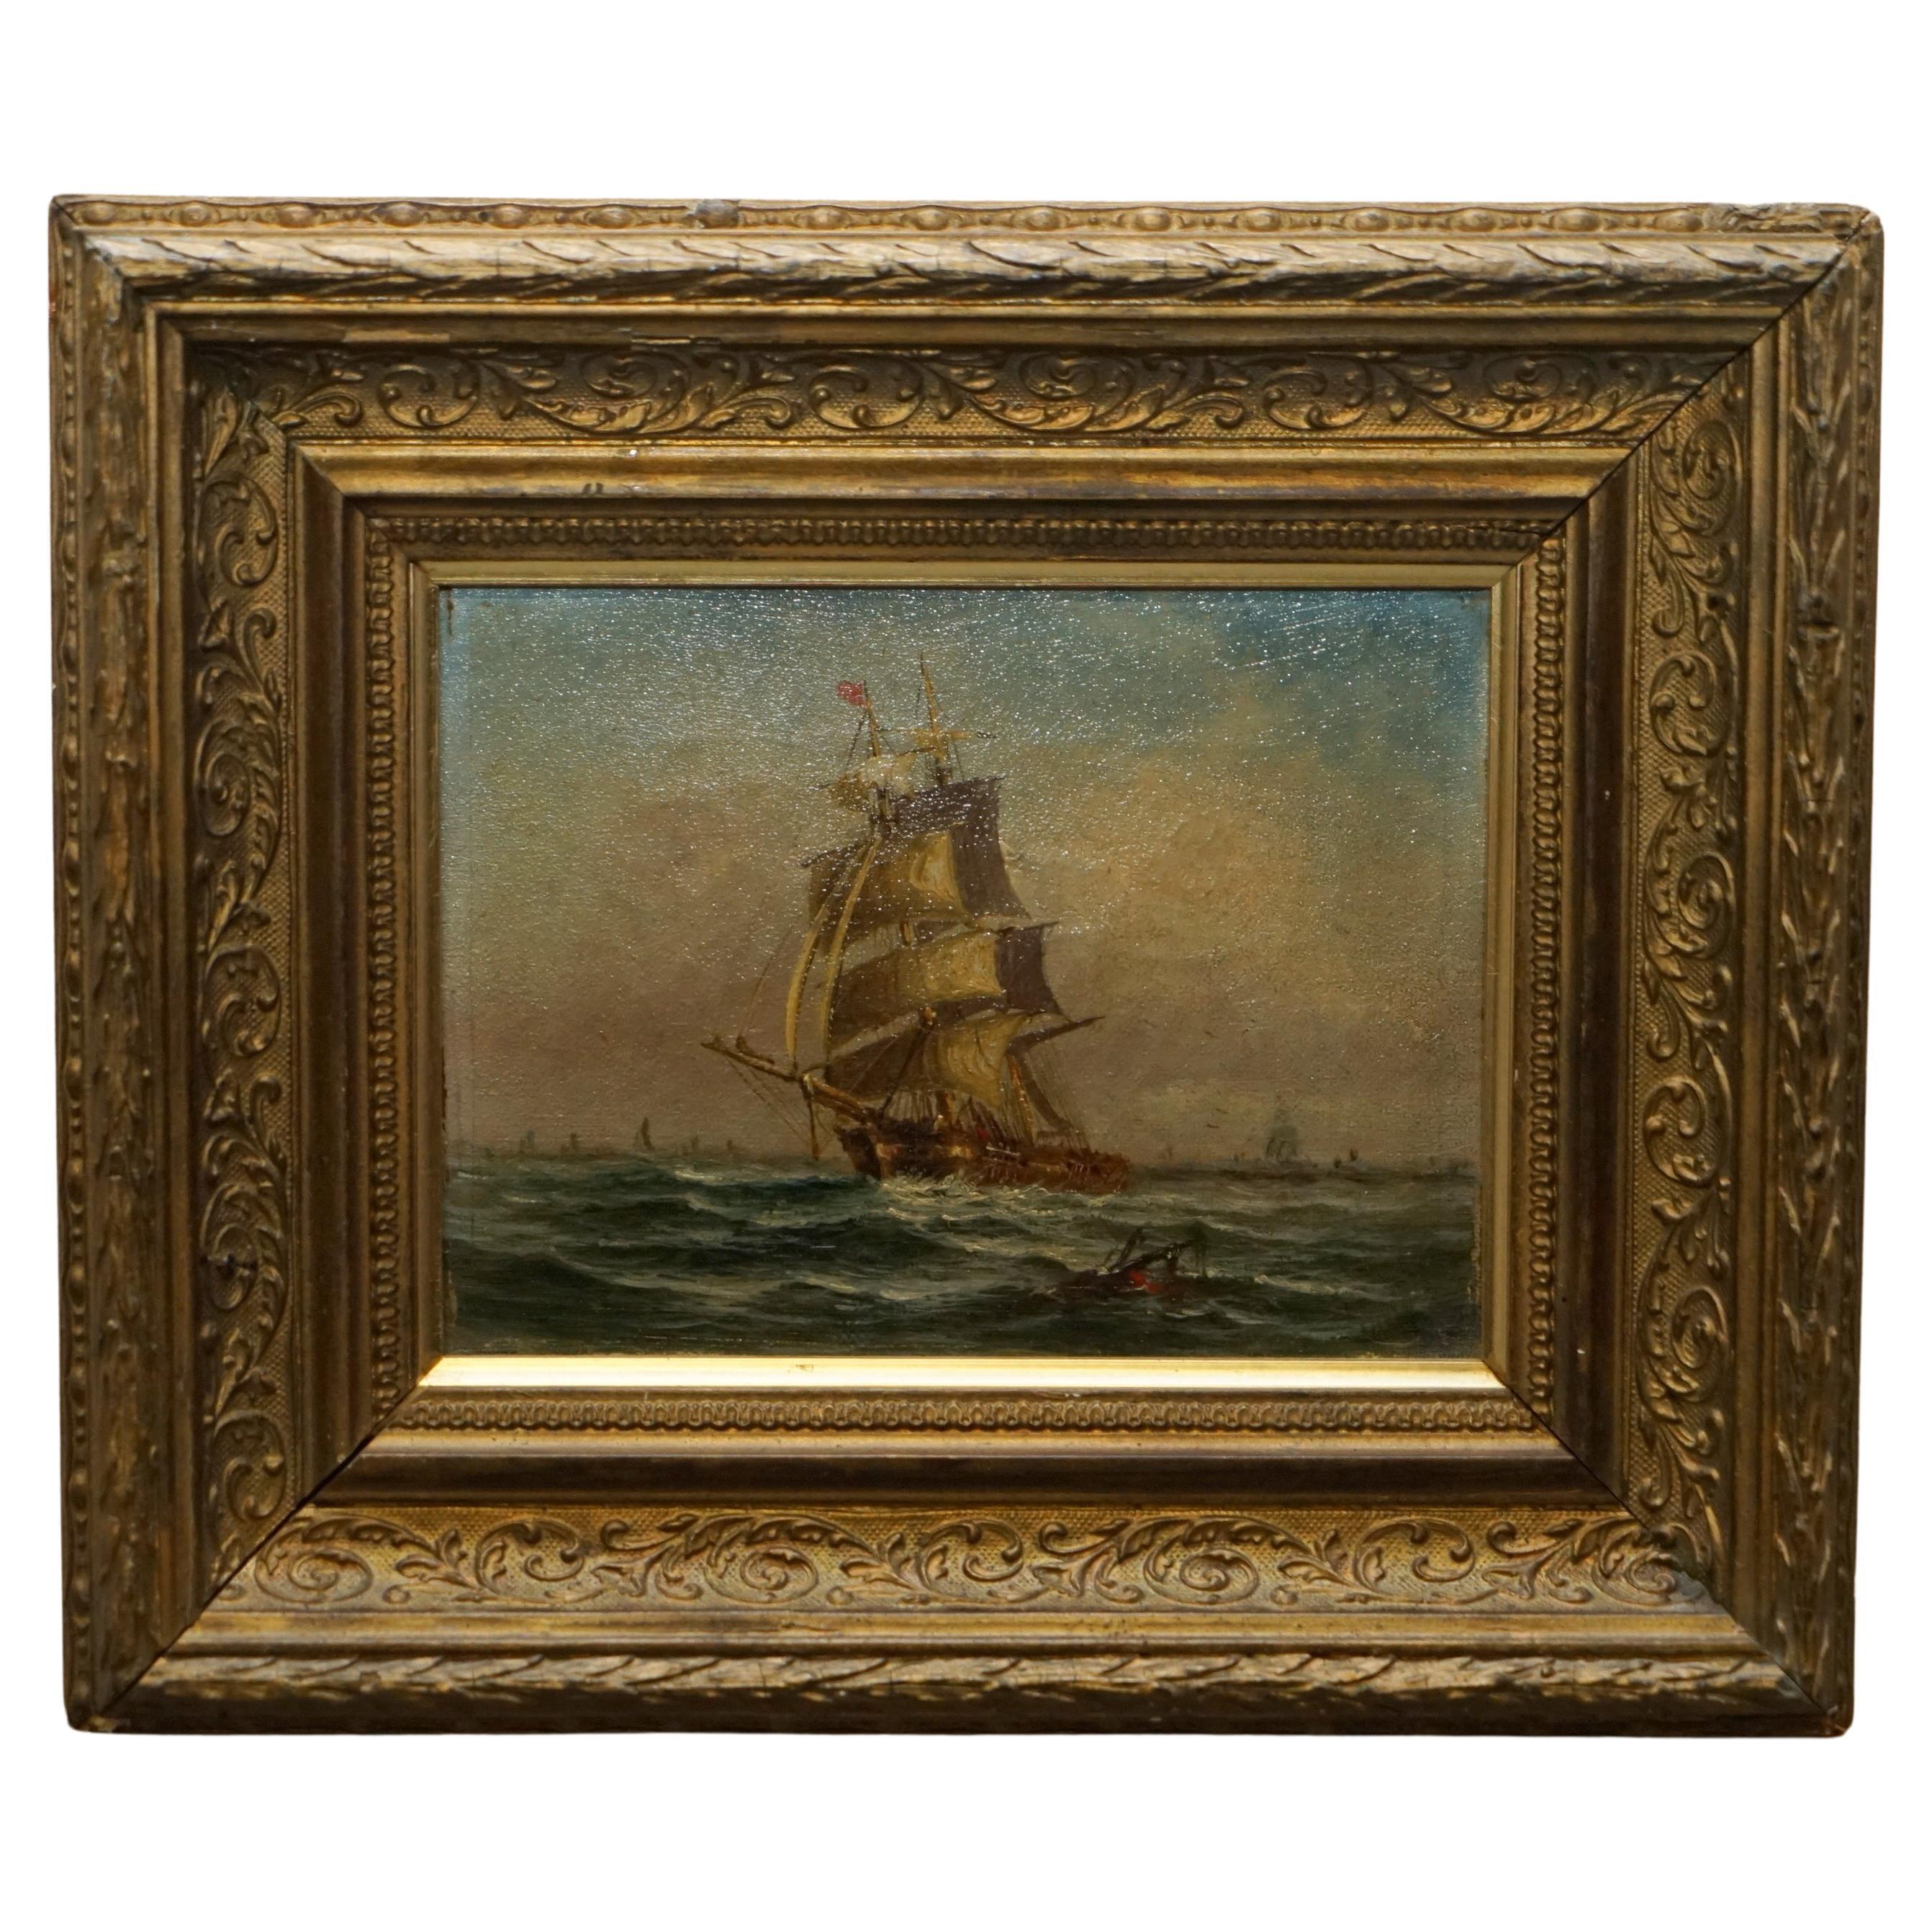 SMALL ANTIQUE NAUTICAL VICtoriaN OIL PAiNTING OF A EARLY 19TH Century SHIP en vente